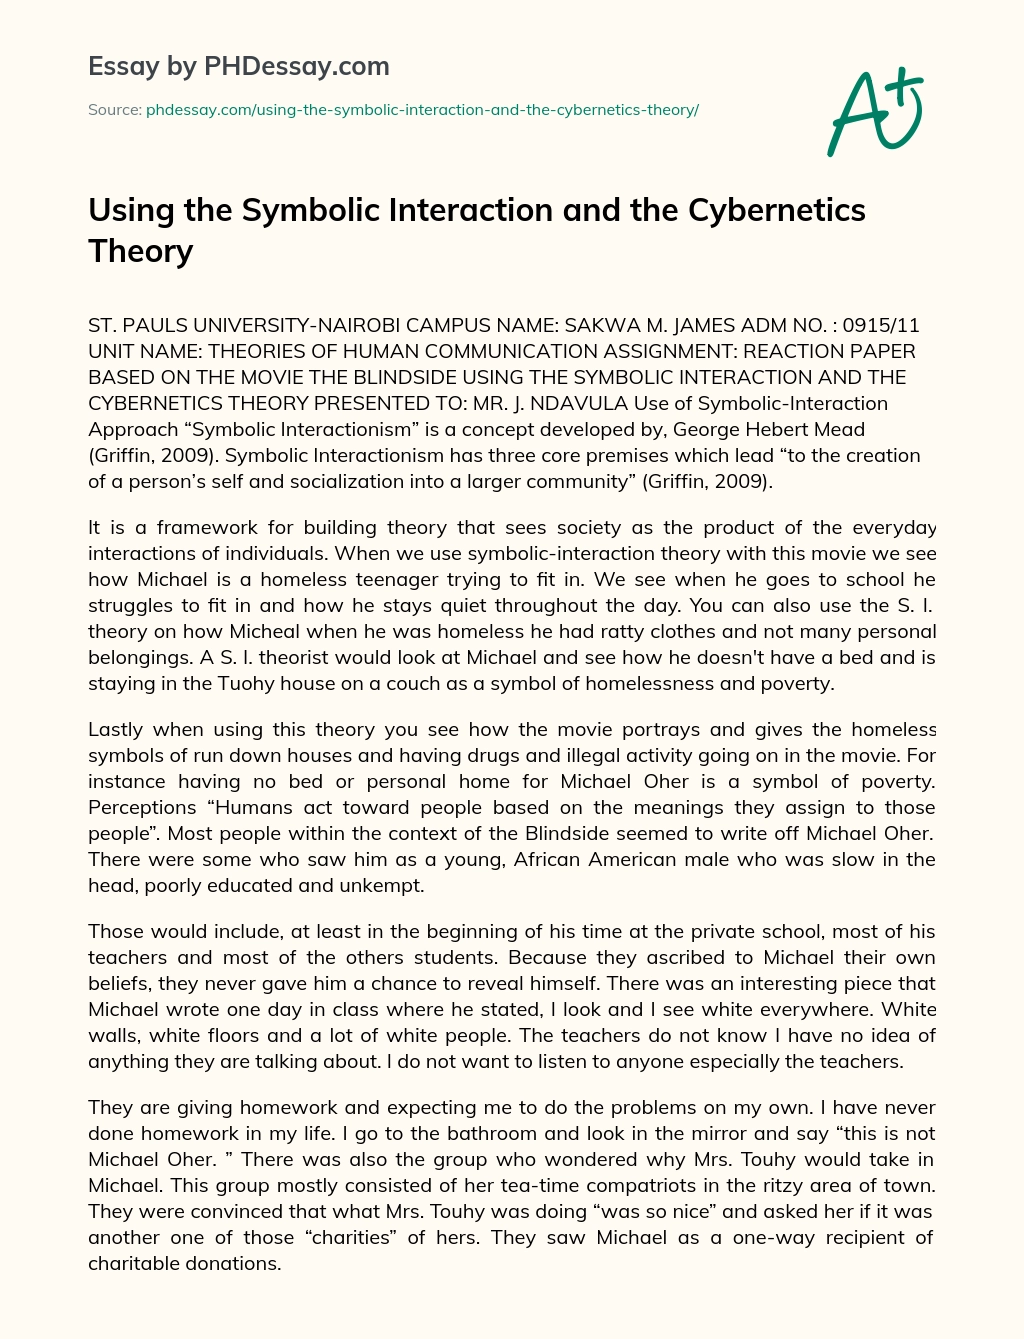 Using the Symbolic Interaction and the Cybernetics Theory essay